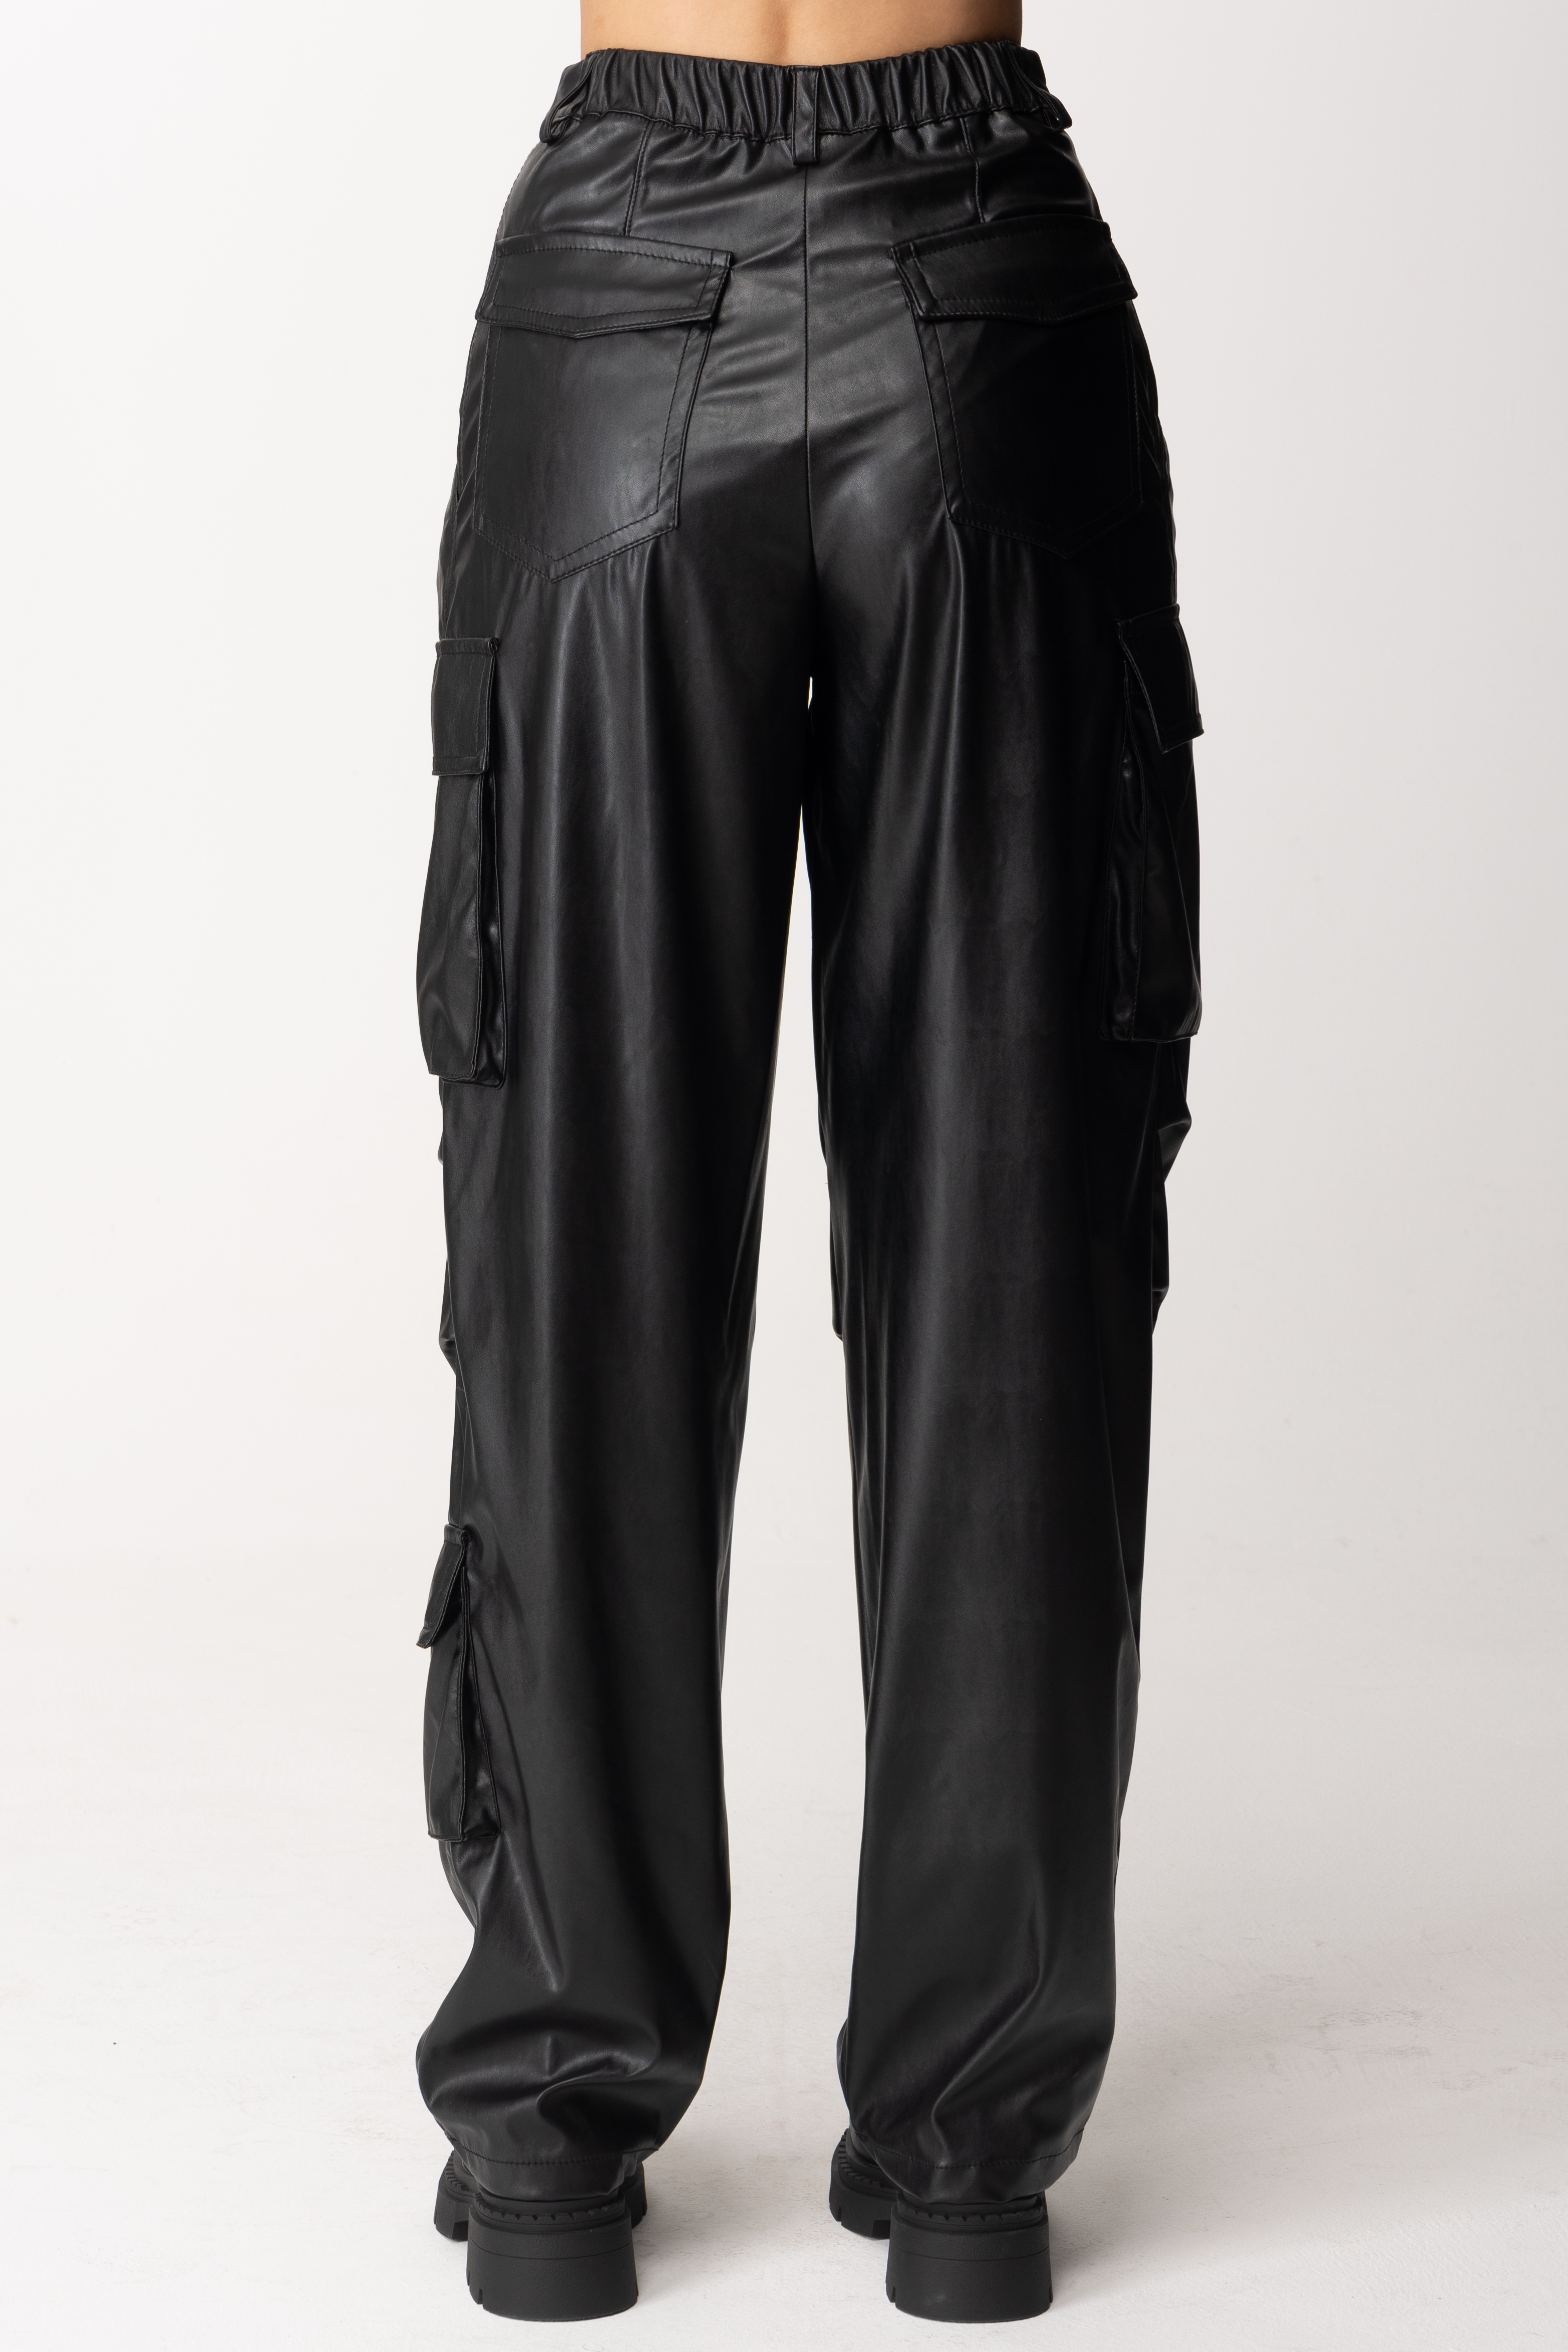 Wide leg Trousers, Trousers, CLOTHING, Woman